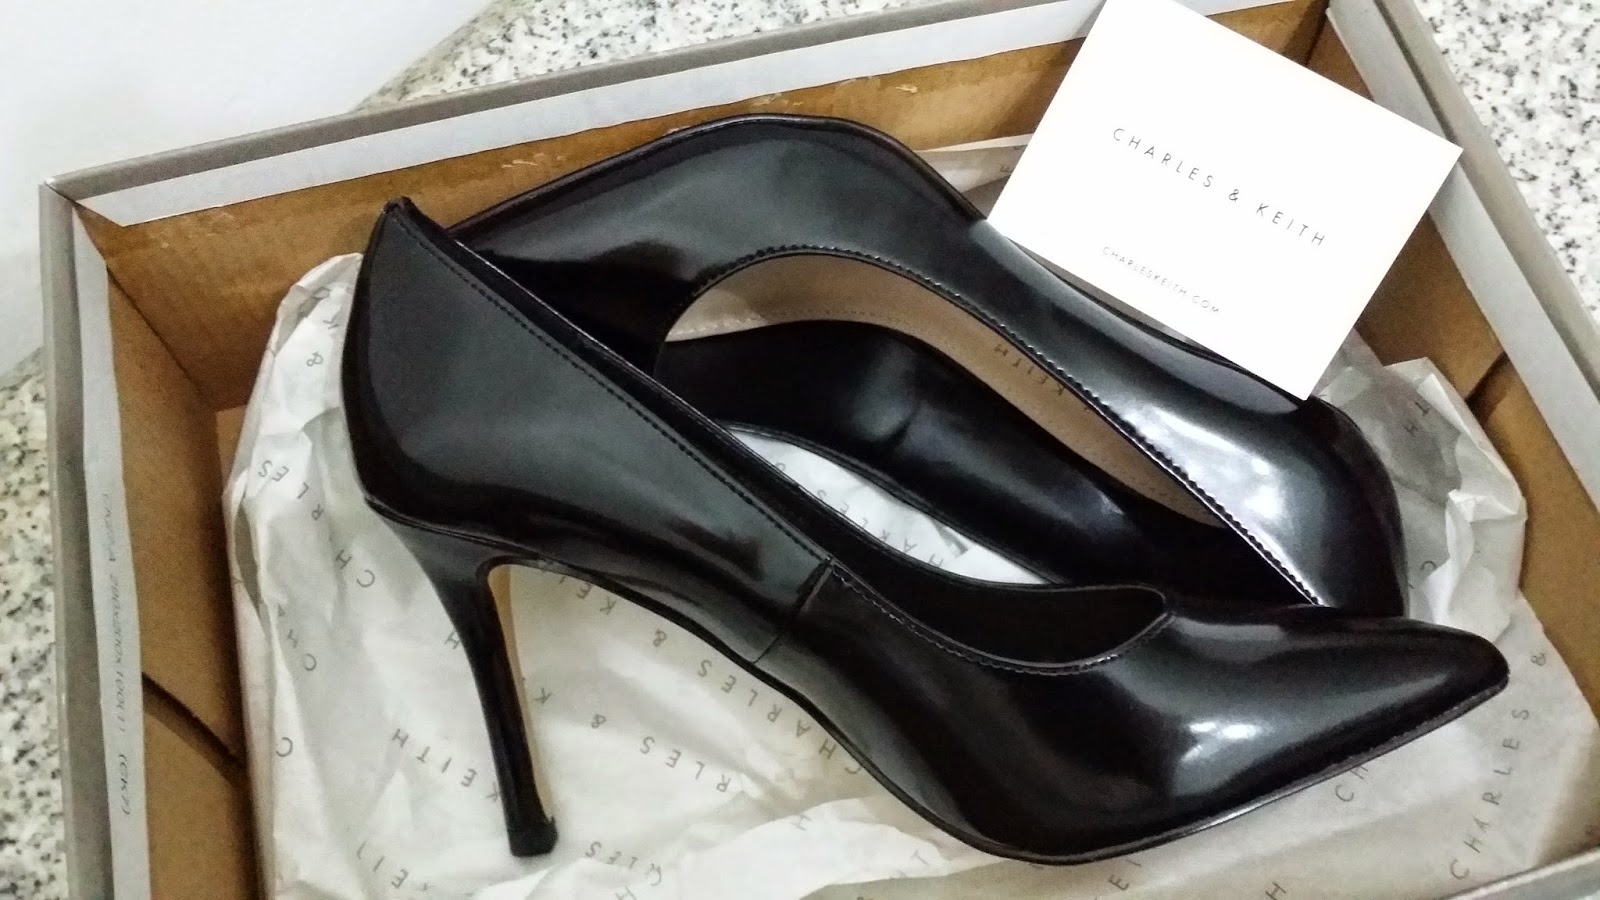 The Newlywed Journal: Charles & Keith black (work) shoes - Reviews!